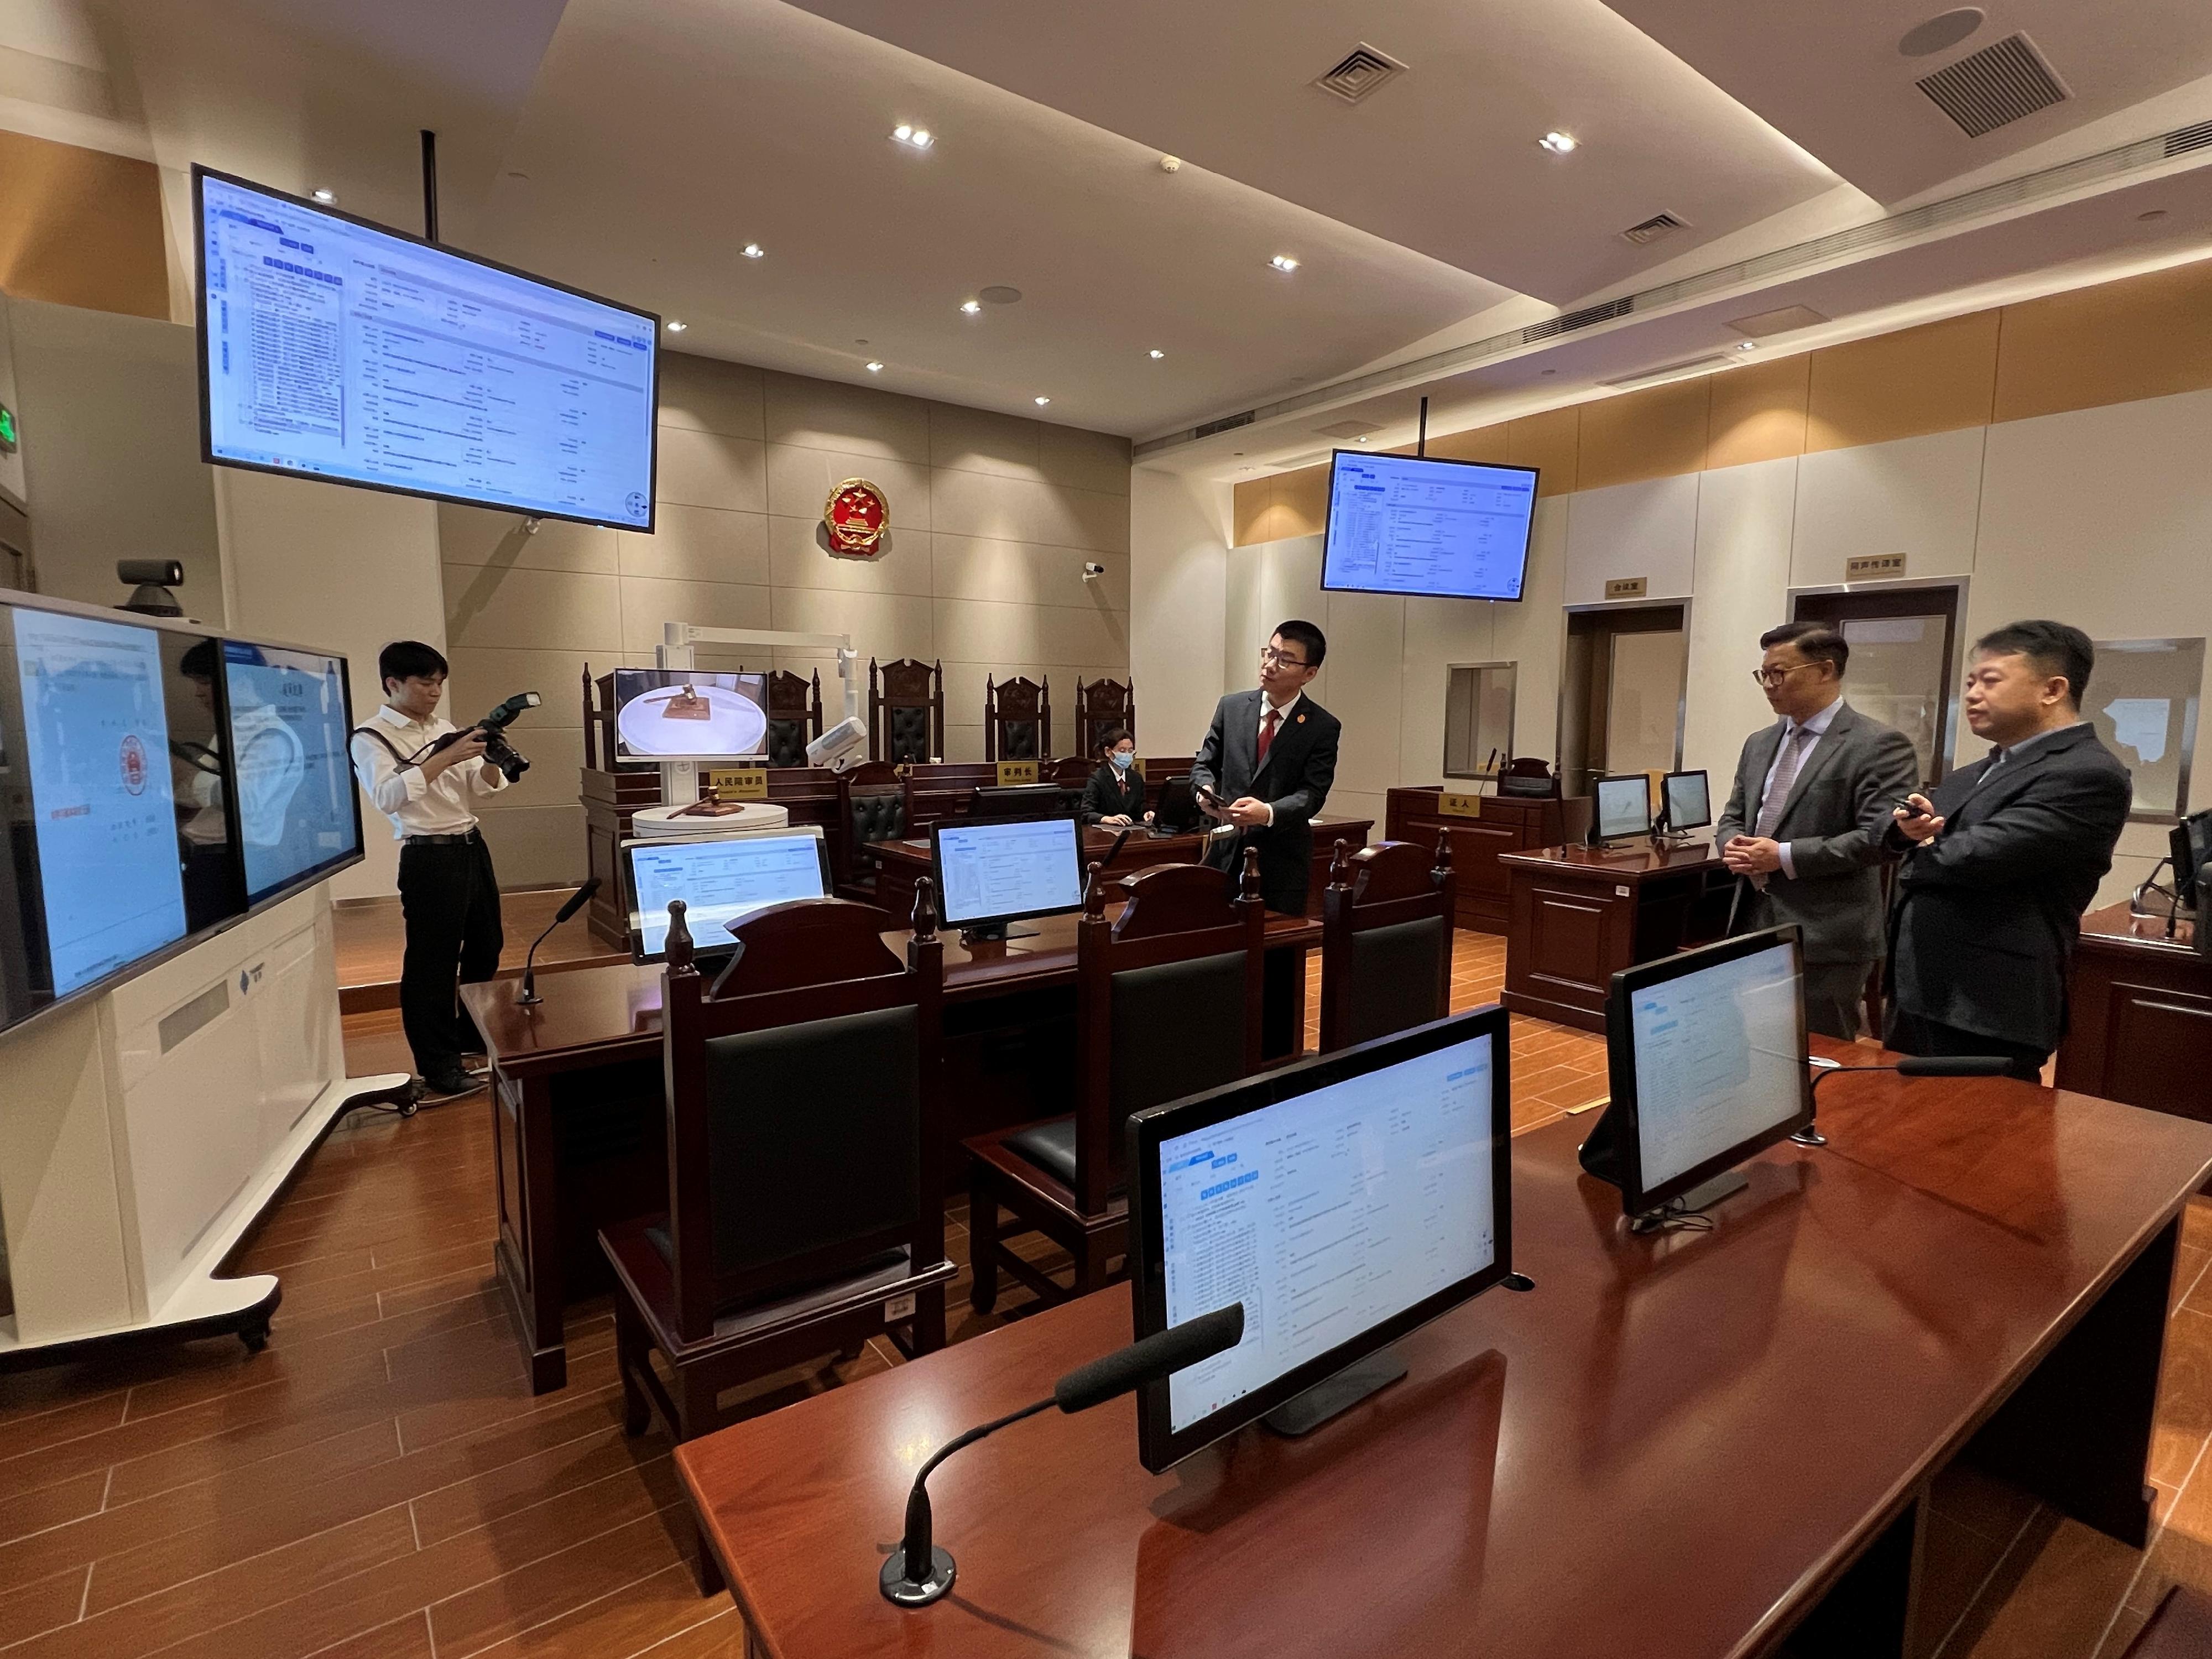 The Deputy Secretary for Justice, Mr Cheung Kwok-kwan (second right), visited the Shenzhen Qianhai Cooperation Zone People's Court in Shenzhen today (April 19), and was briefed by its President, Mr Bian Fei (first right), on the latest situation of the Court's application of technology.
